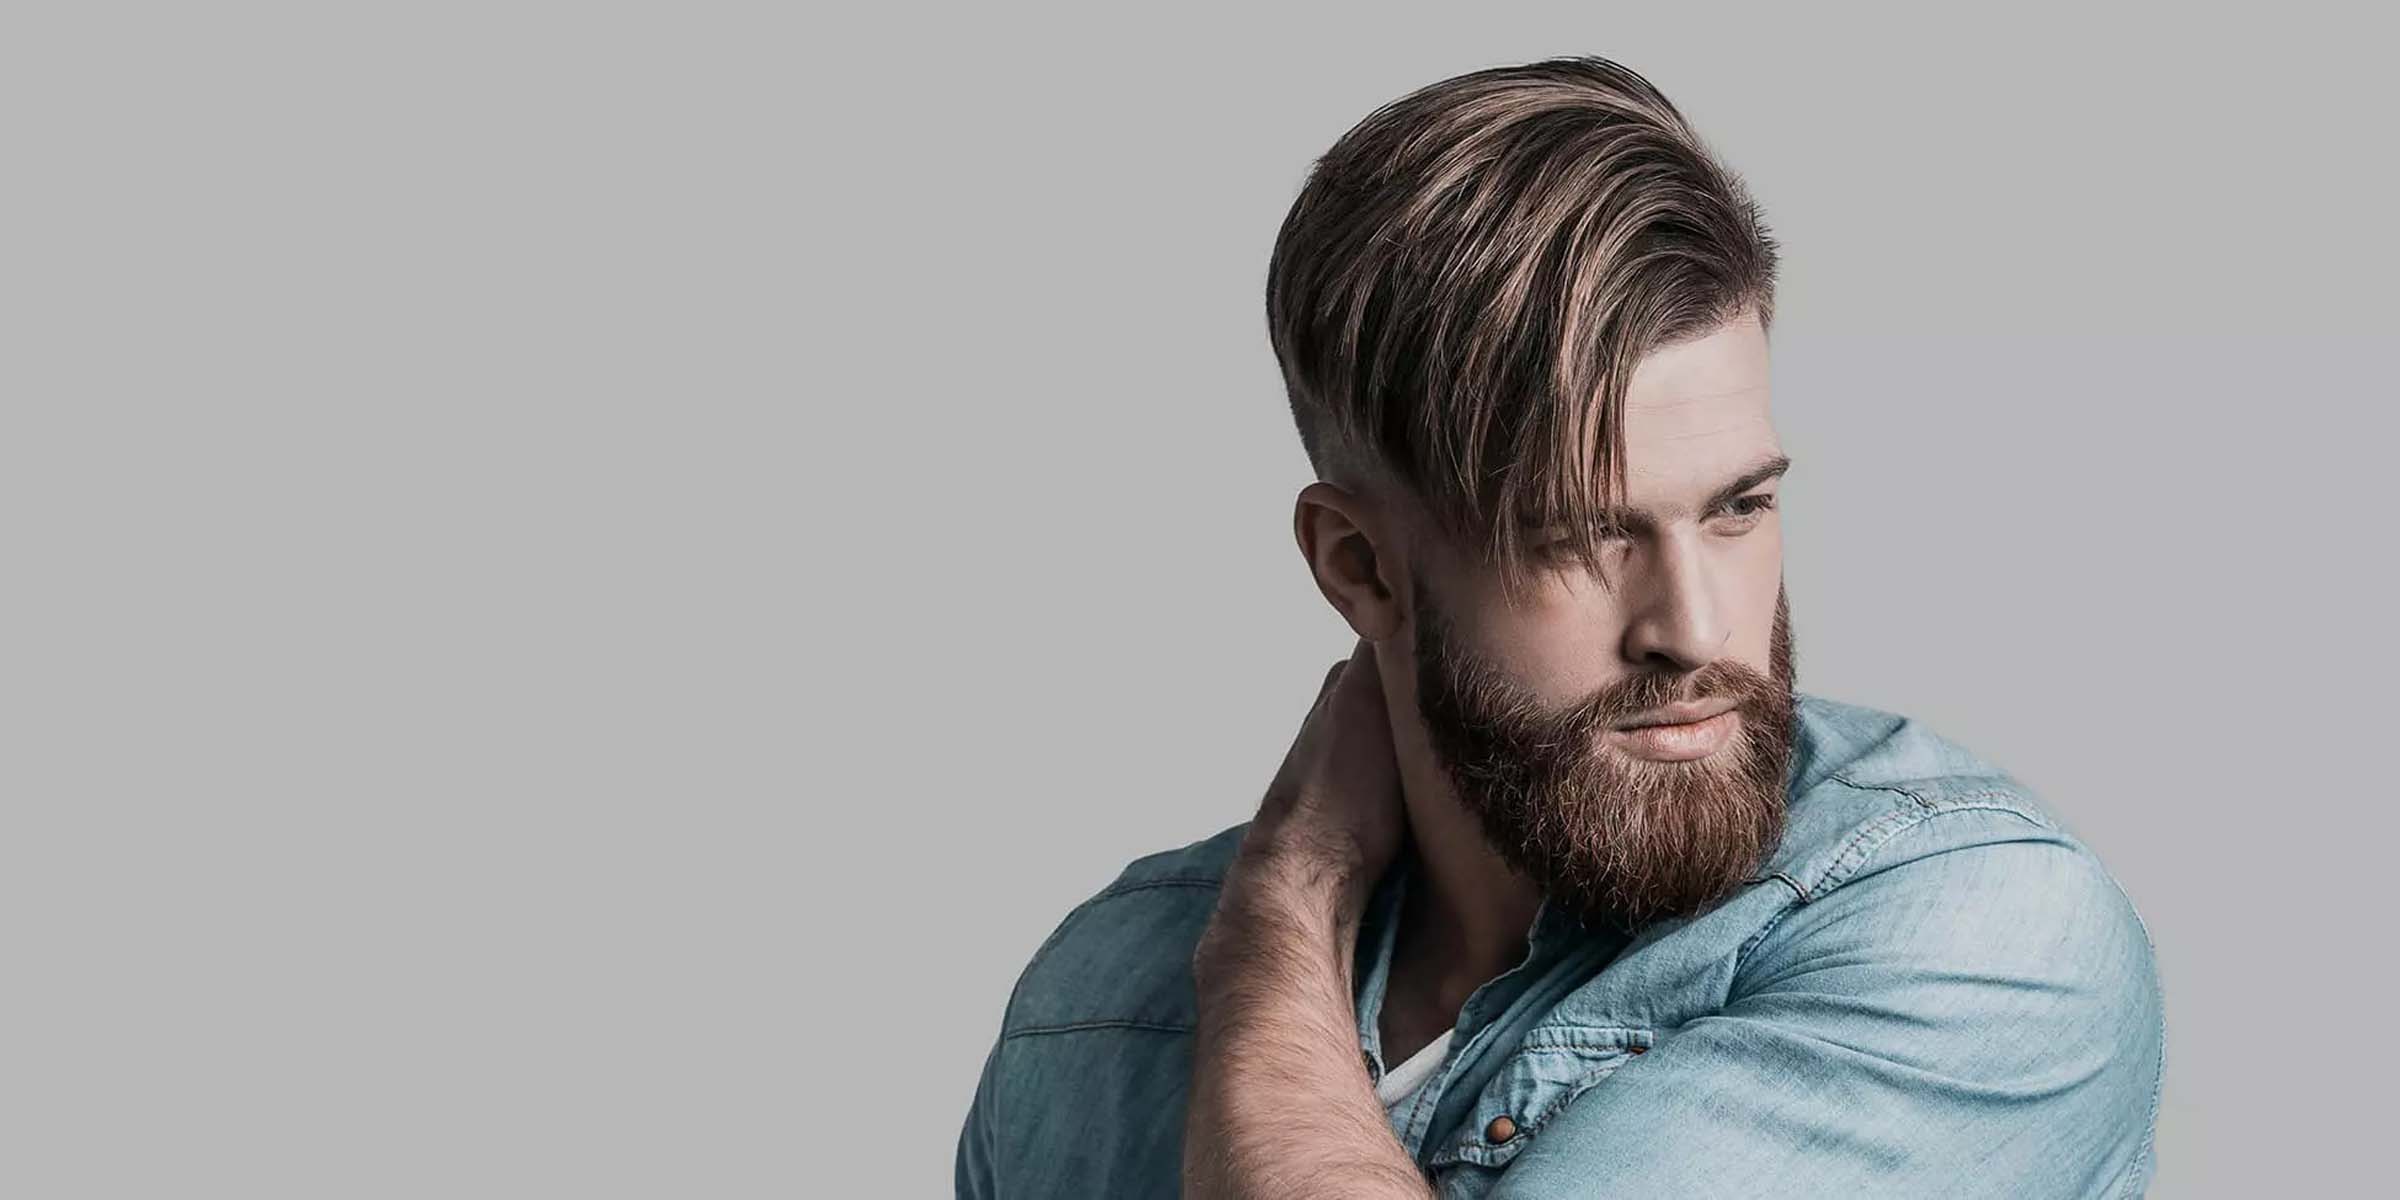 55 Short Haircuts For Men: The Latest Styles For 2023